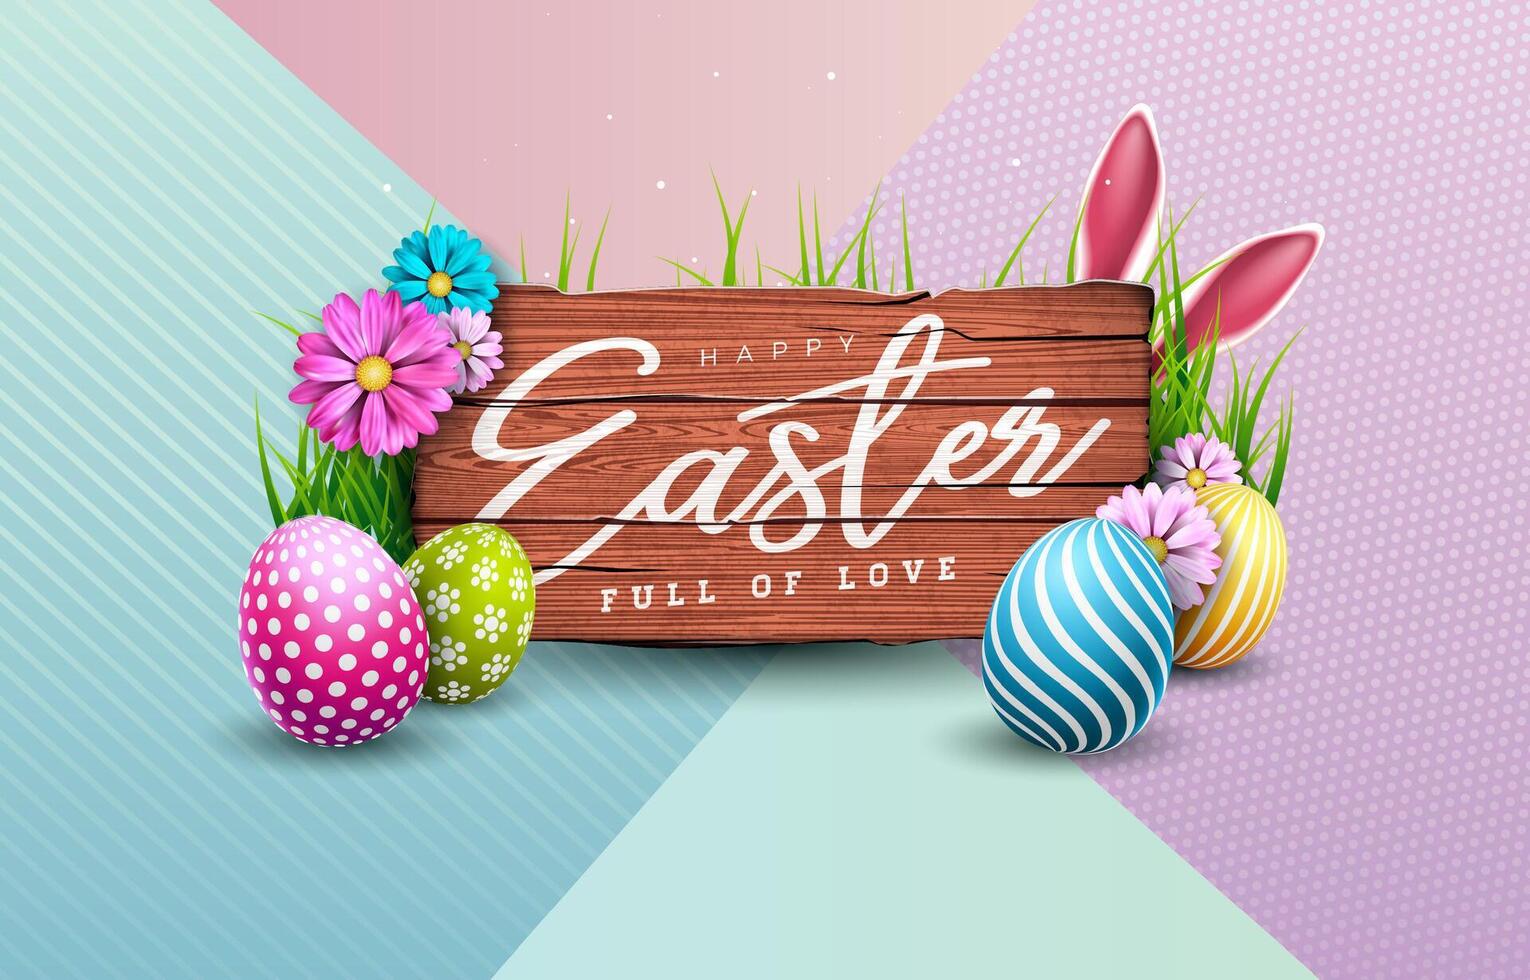 Vector Illustration of Happy Easter Holiday with Colorful Painted Egg, Spring Flower and Rabbit Ears on Abstract Pastel Background. International Celebration Design with Typography for Greeting Card